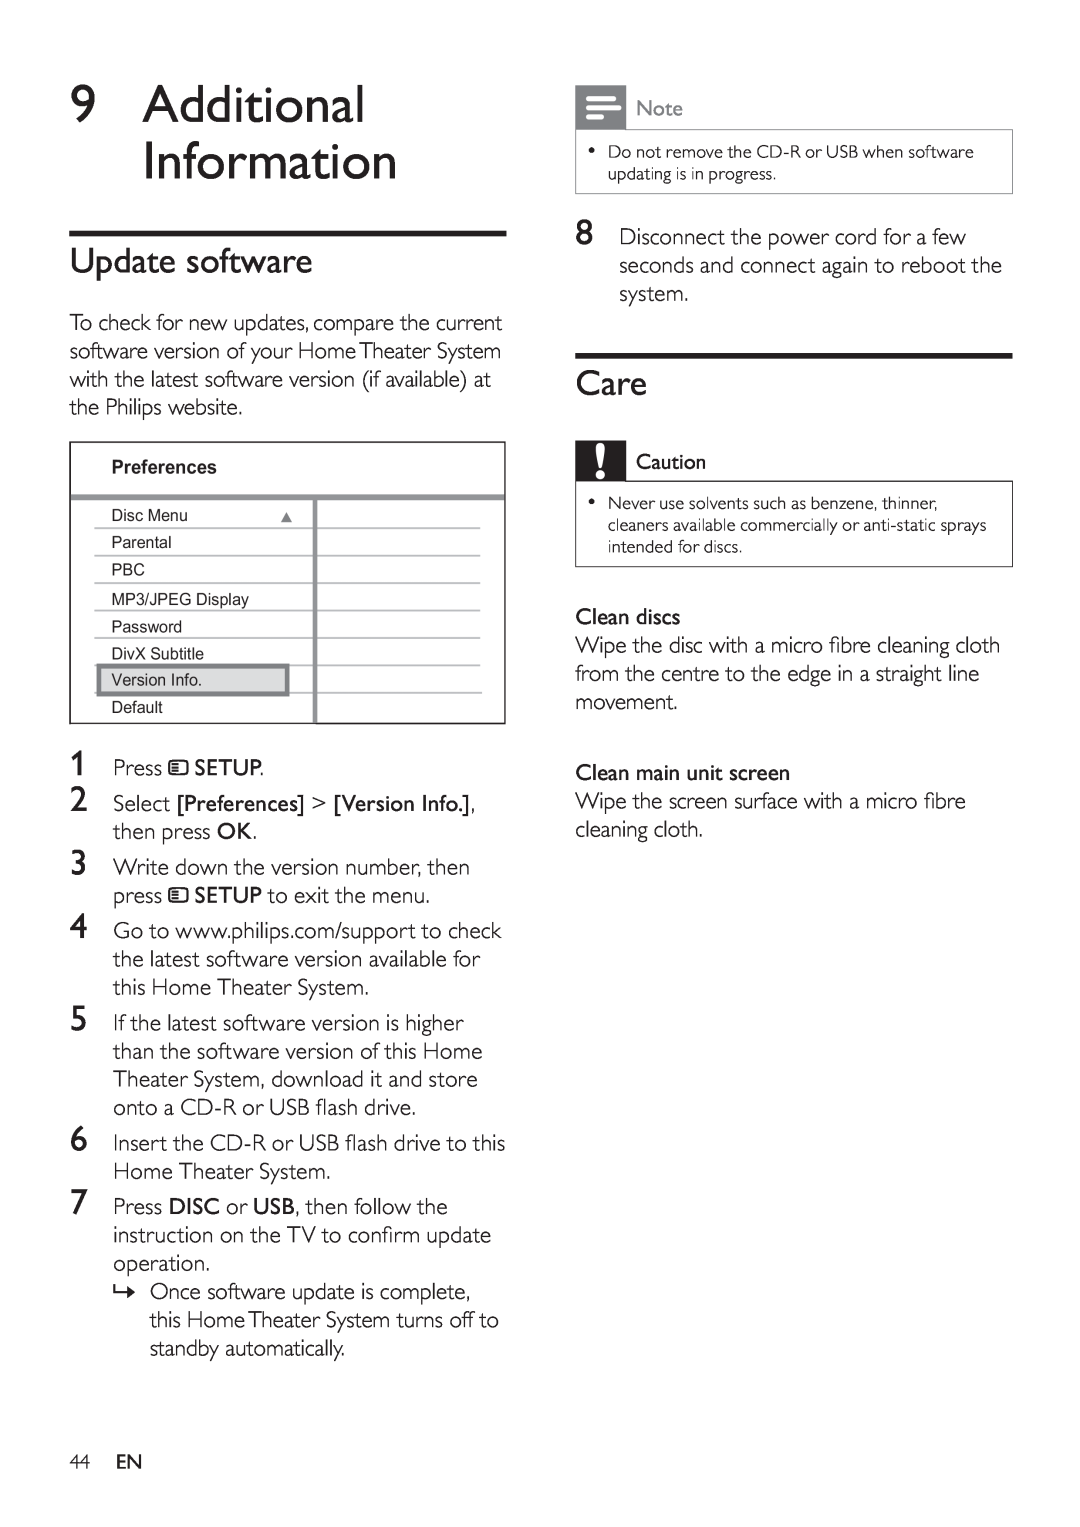 Philips HTS3270, HTS3377W user manual 9Additional Information, Update software, Care 